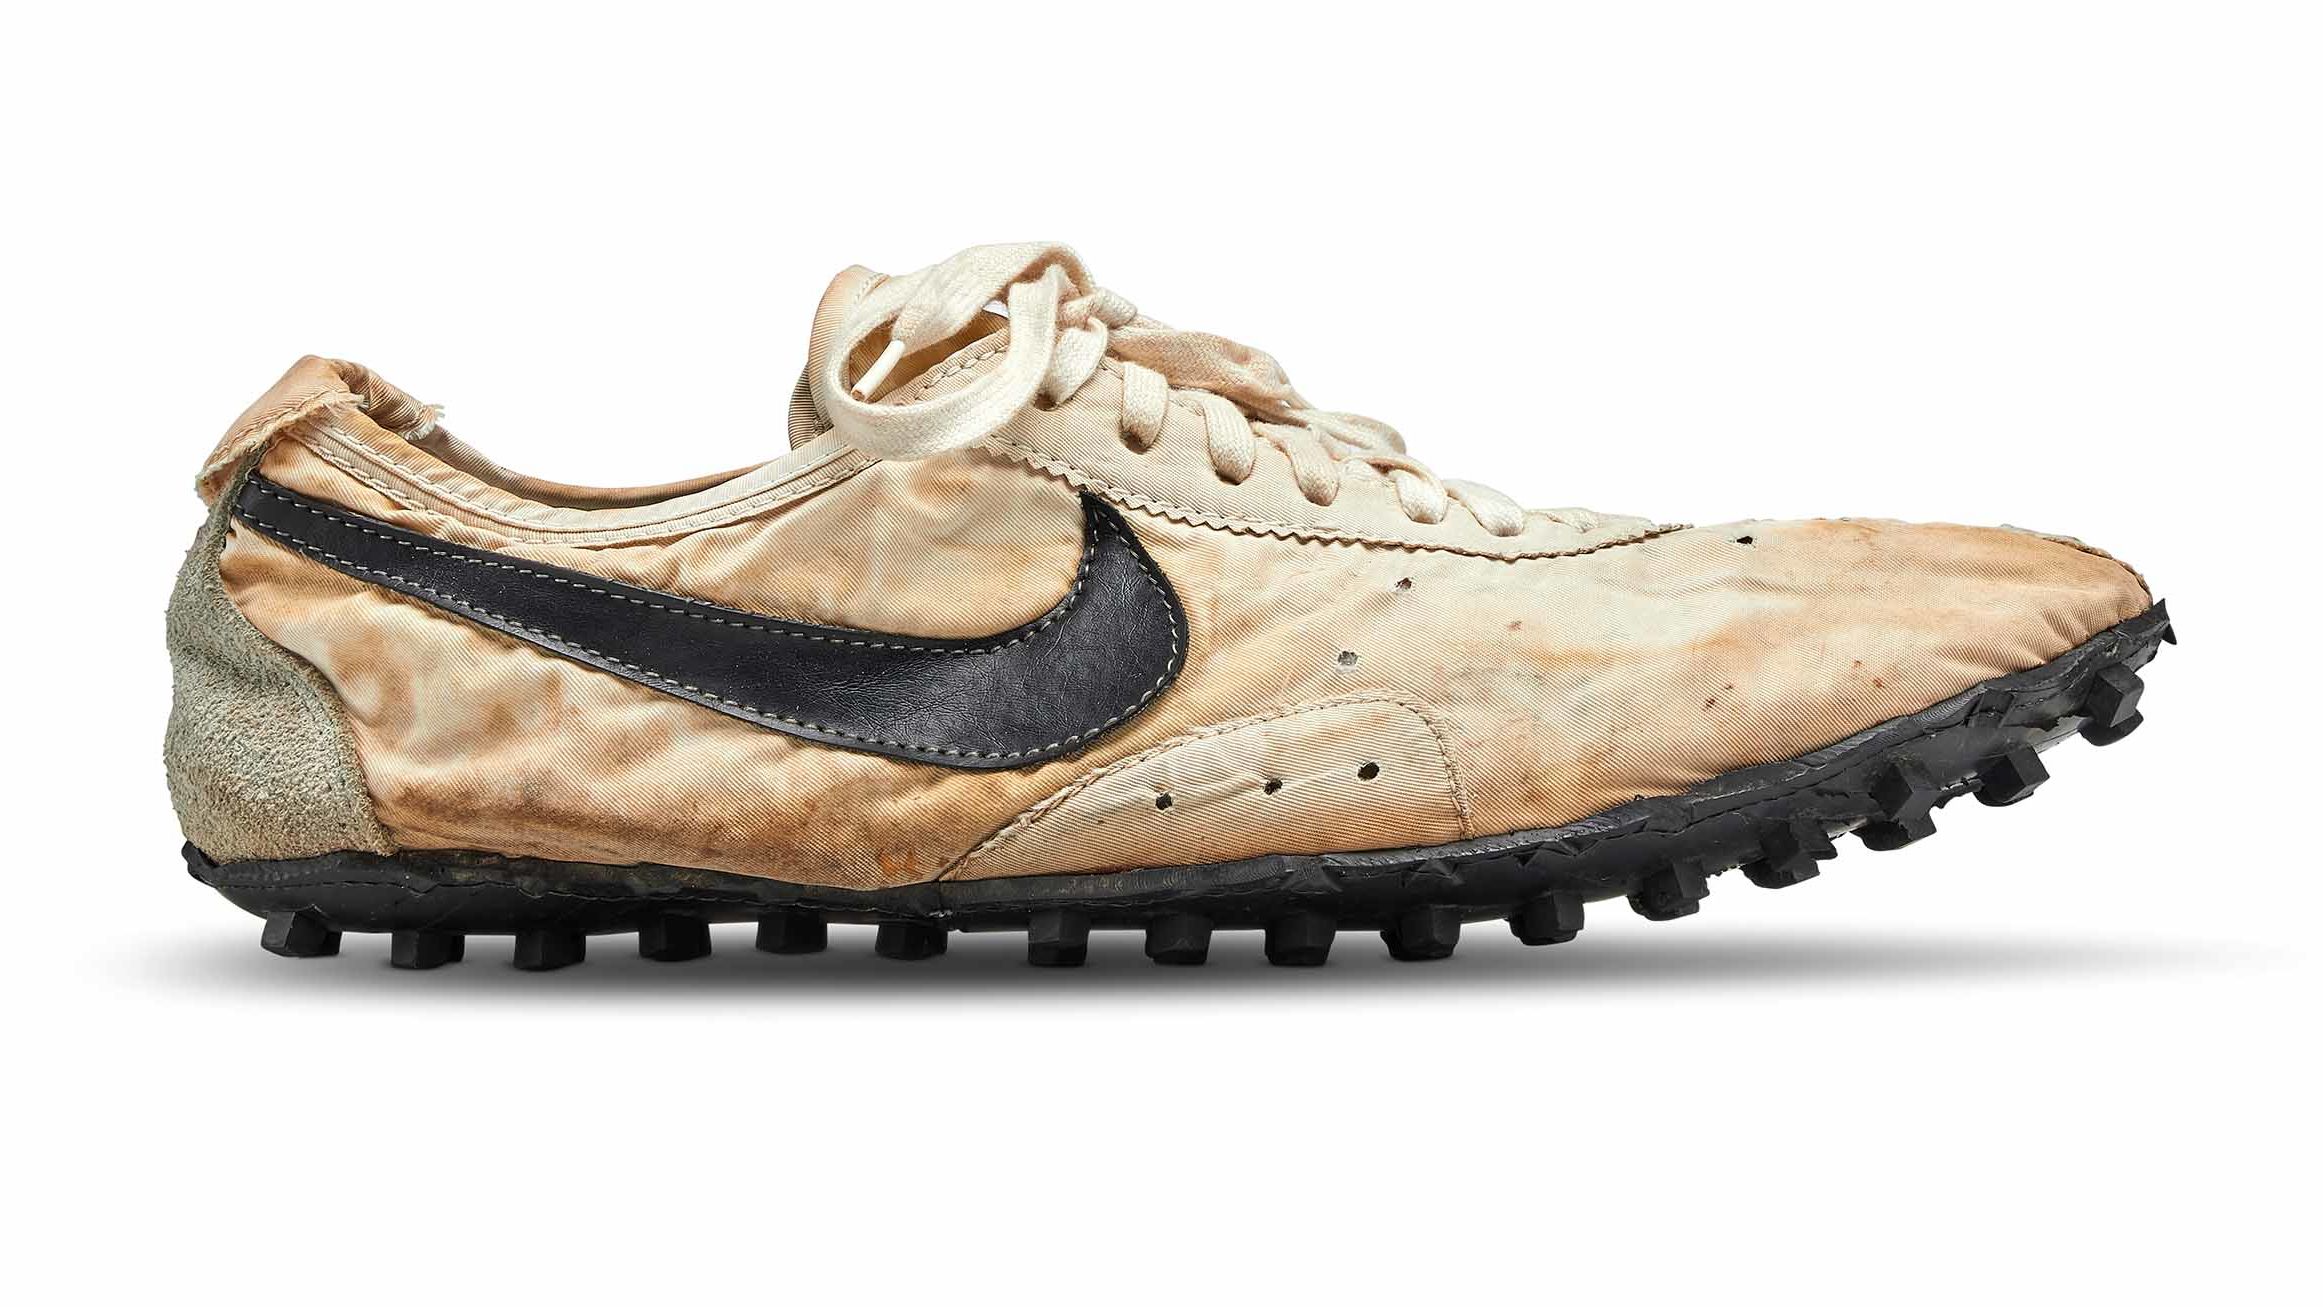 Nike's rare 'Moon Shoe' is sold for $437,500, shattering the auction sneakers | CNN